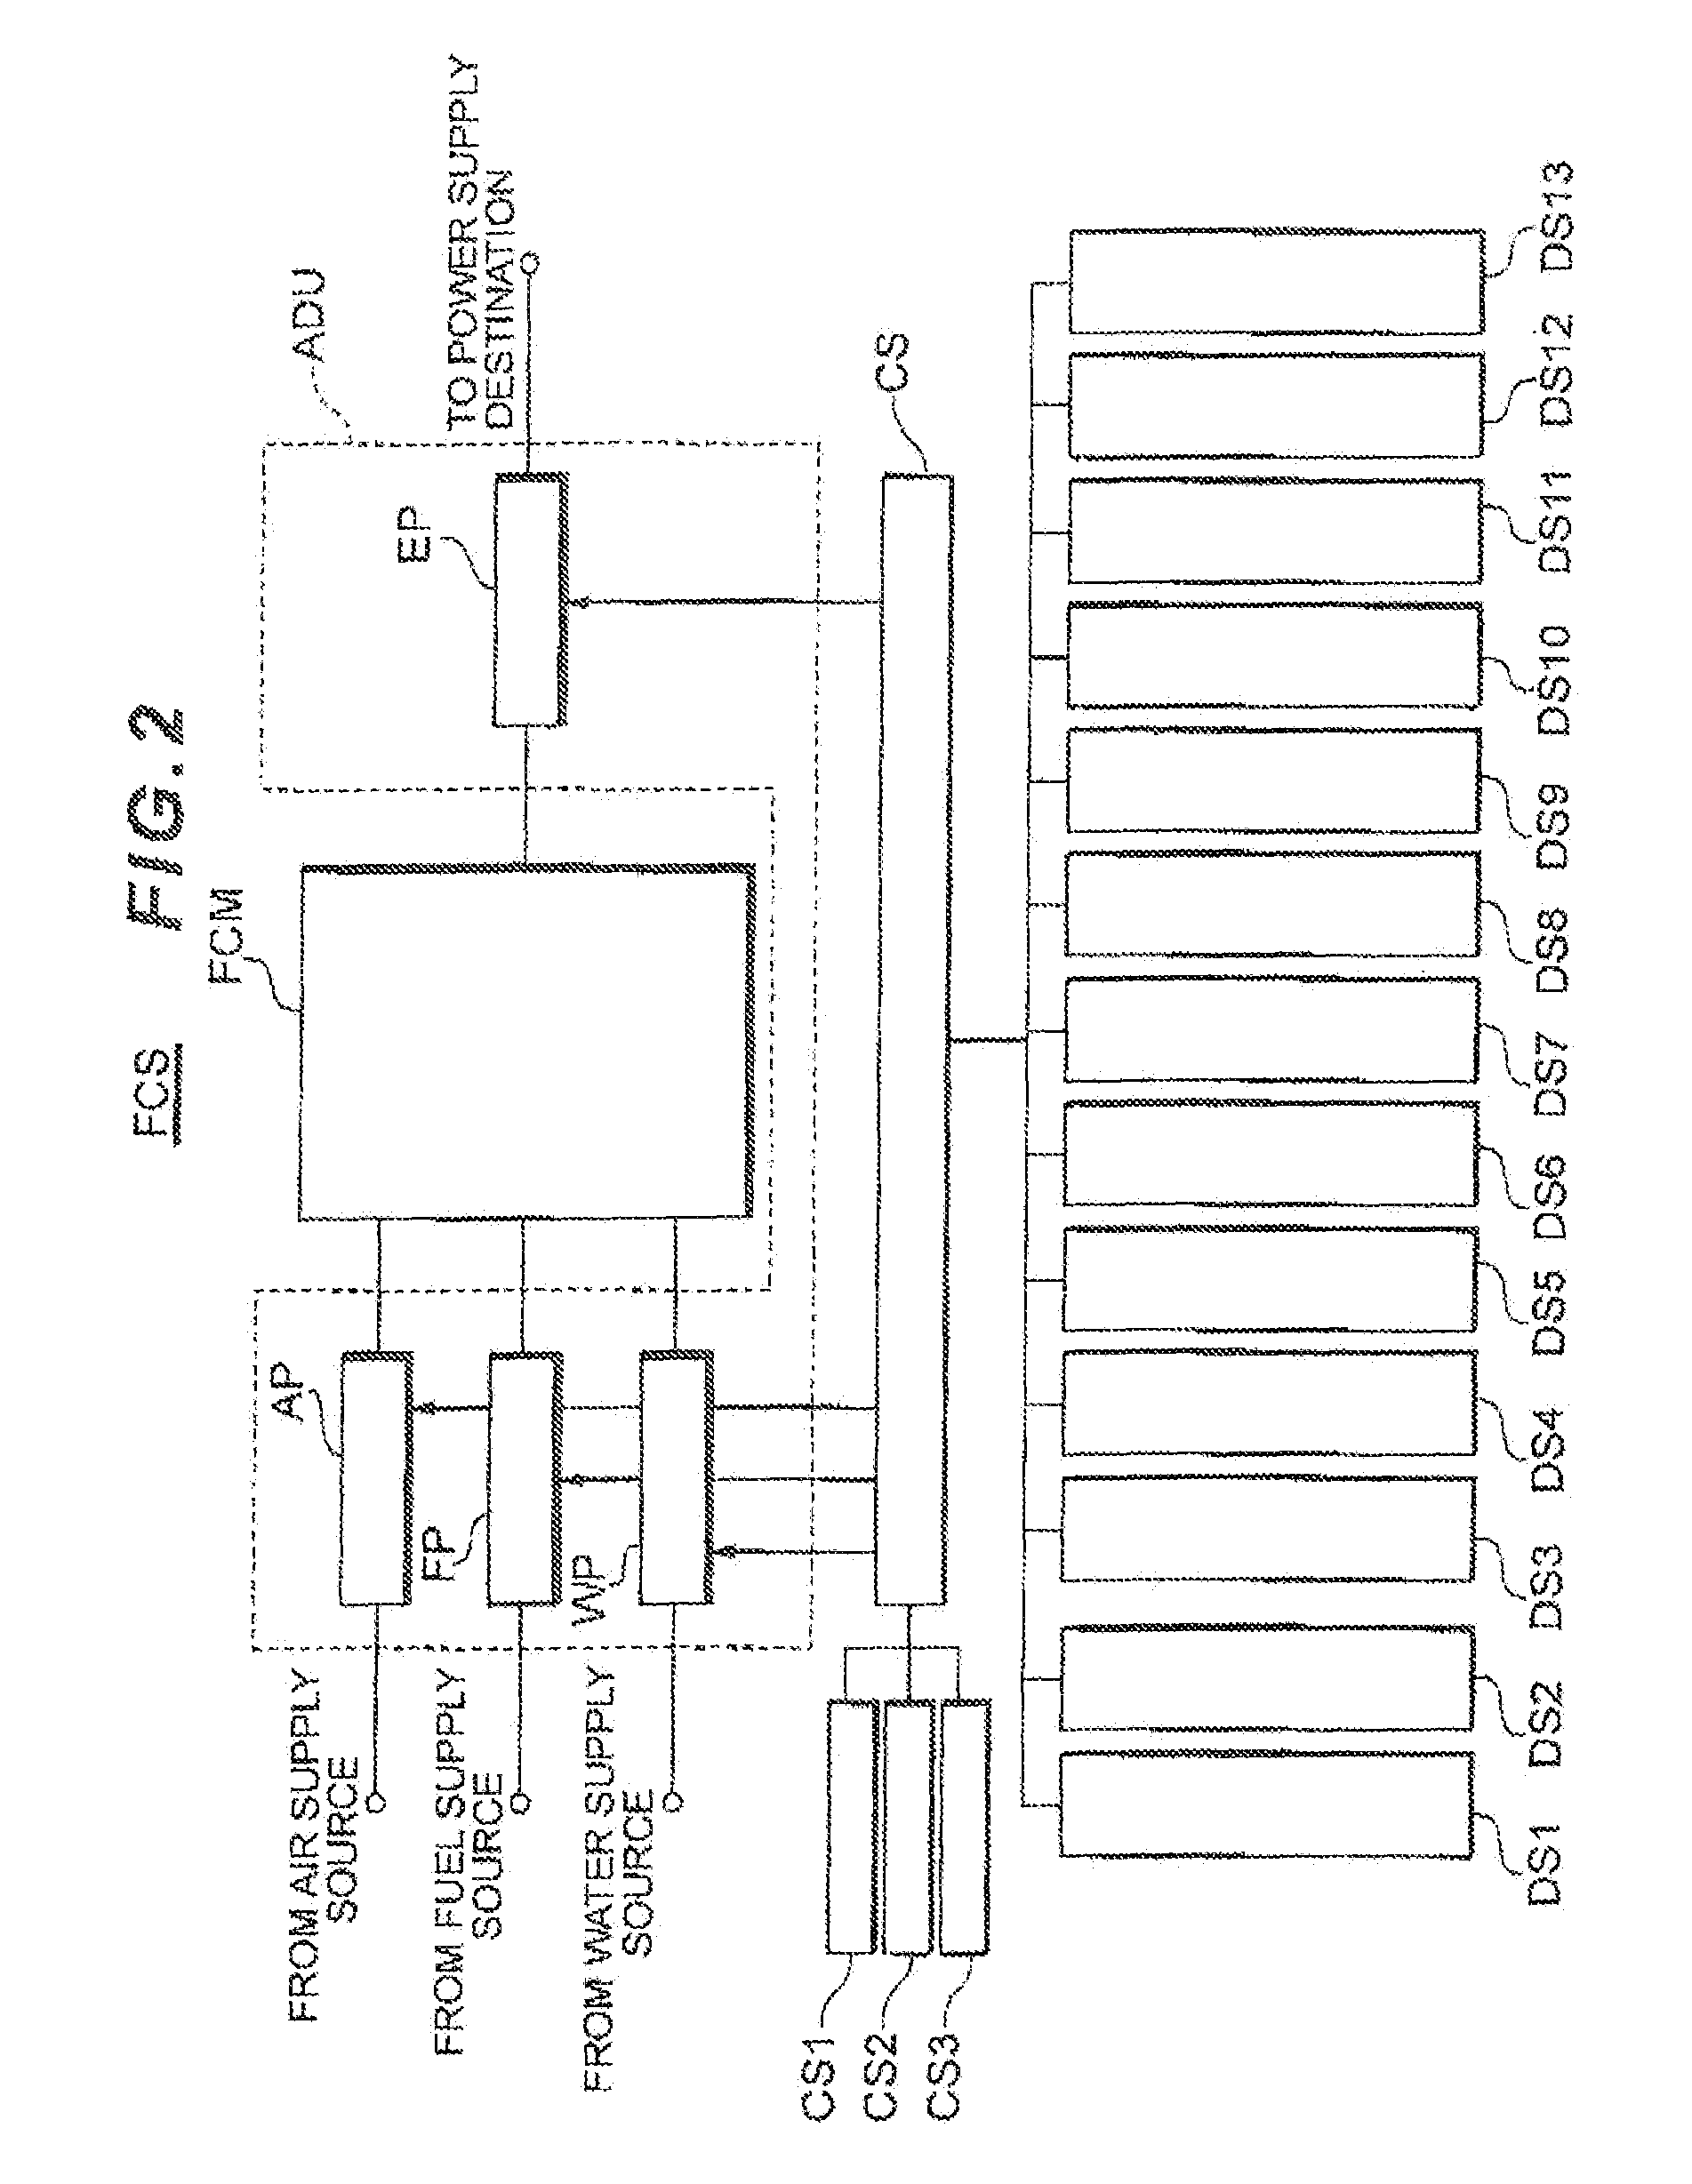 Fuel cell system having controllable water feed flow rate